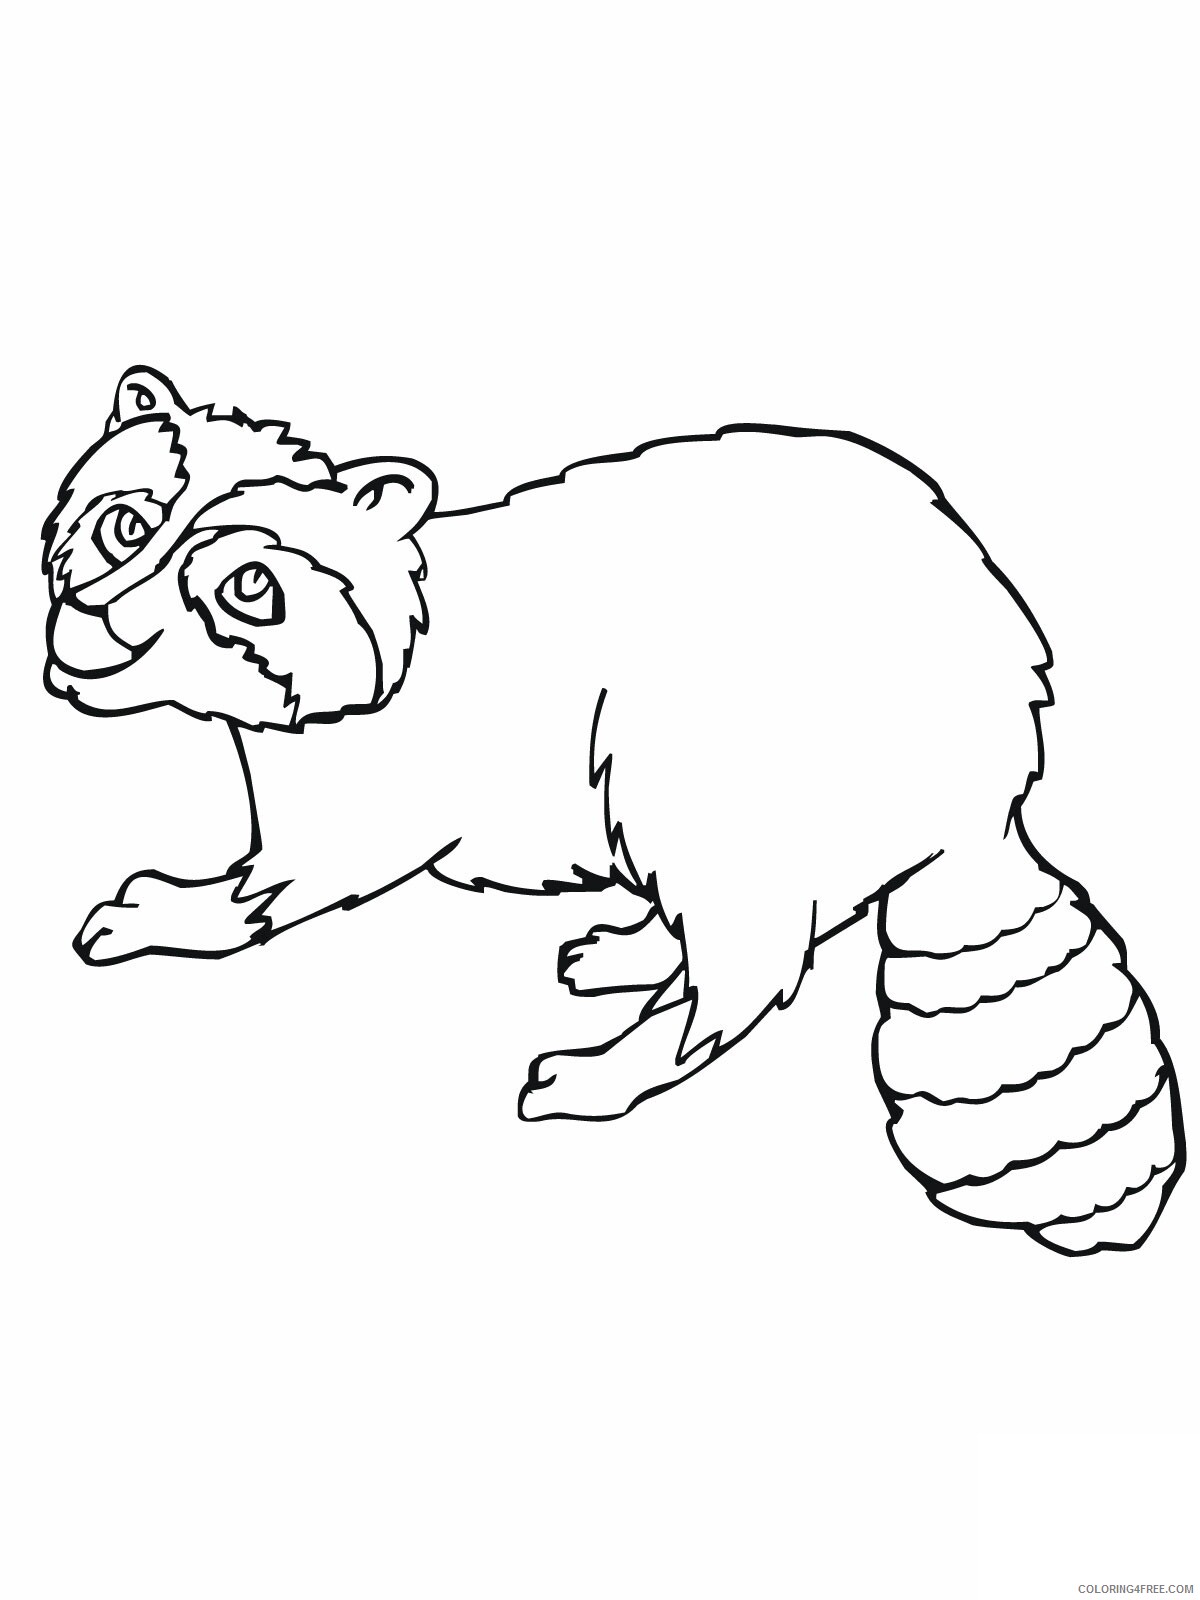 Raccoon Coloring Pages Animal Printable Sheets Raccoon Pictures 2021 4218 Coloring4free